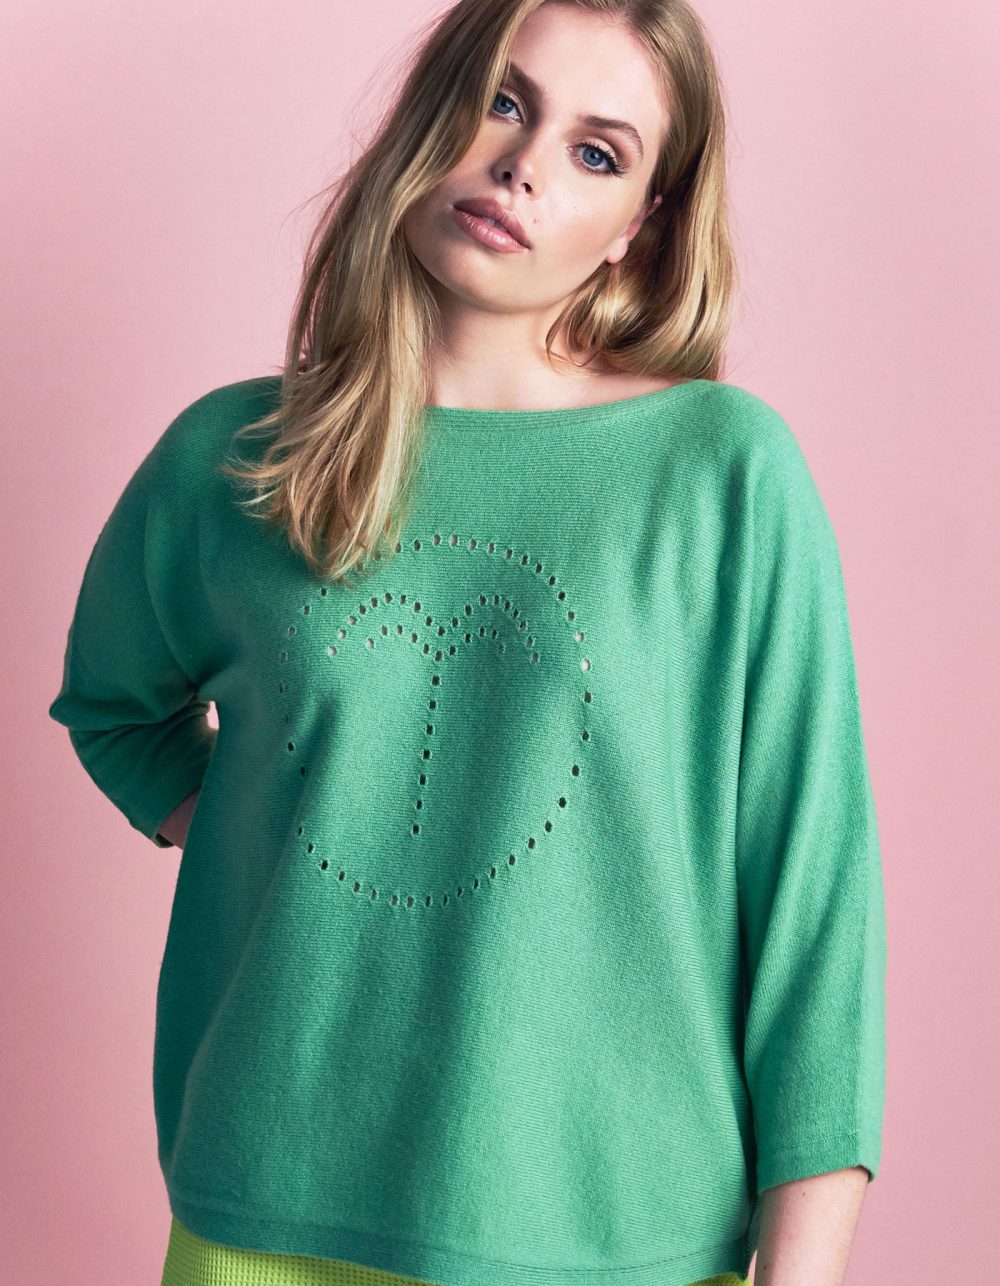 A model wearing the cashmere palm jumper in pitch green, part of the malin darlin range of designer cashmere jumpers.